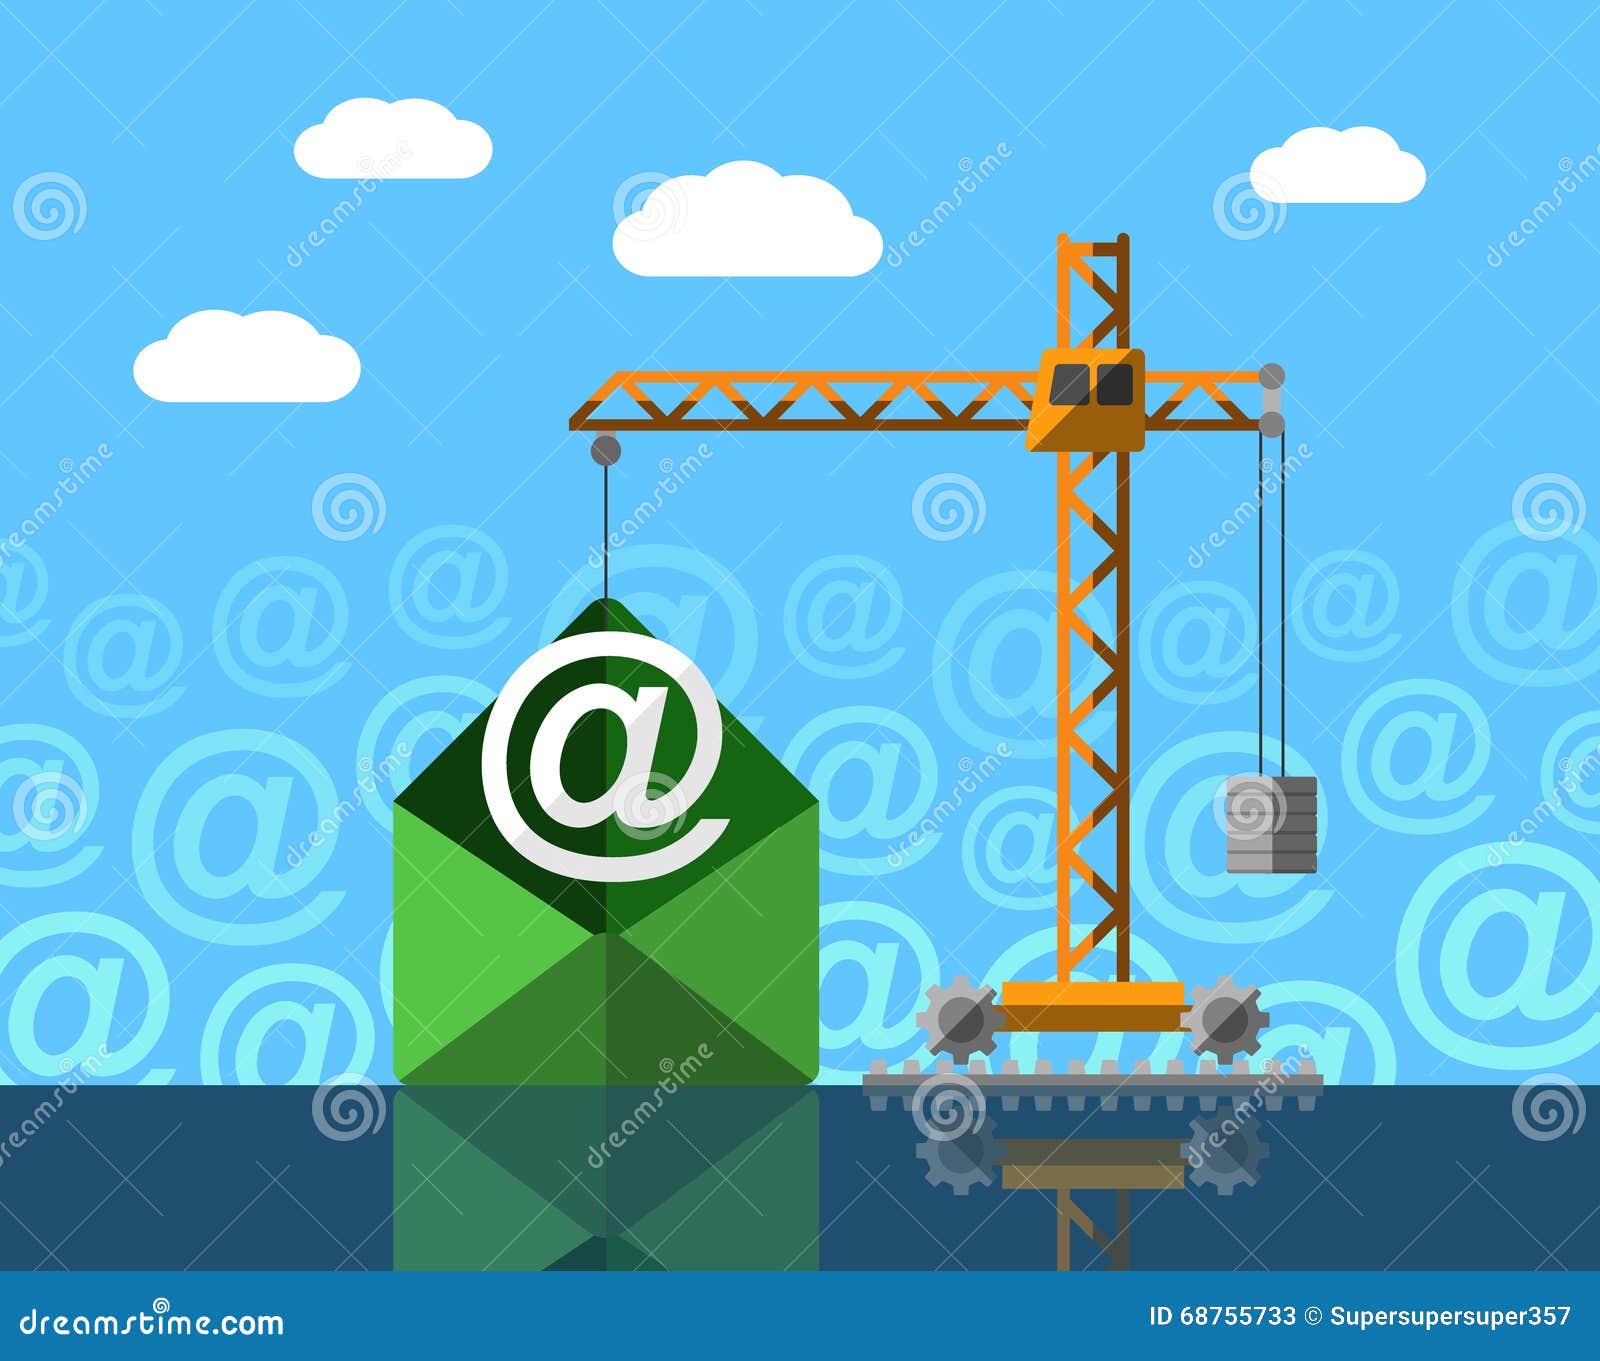 Crane Lifting Symbol From Mail Envelope Colorful Concept Stock Vector Illustration Of Open Letter 68755733